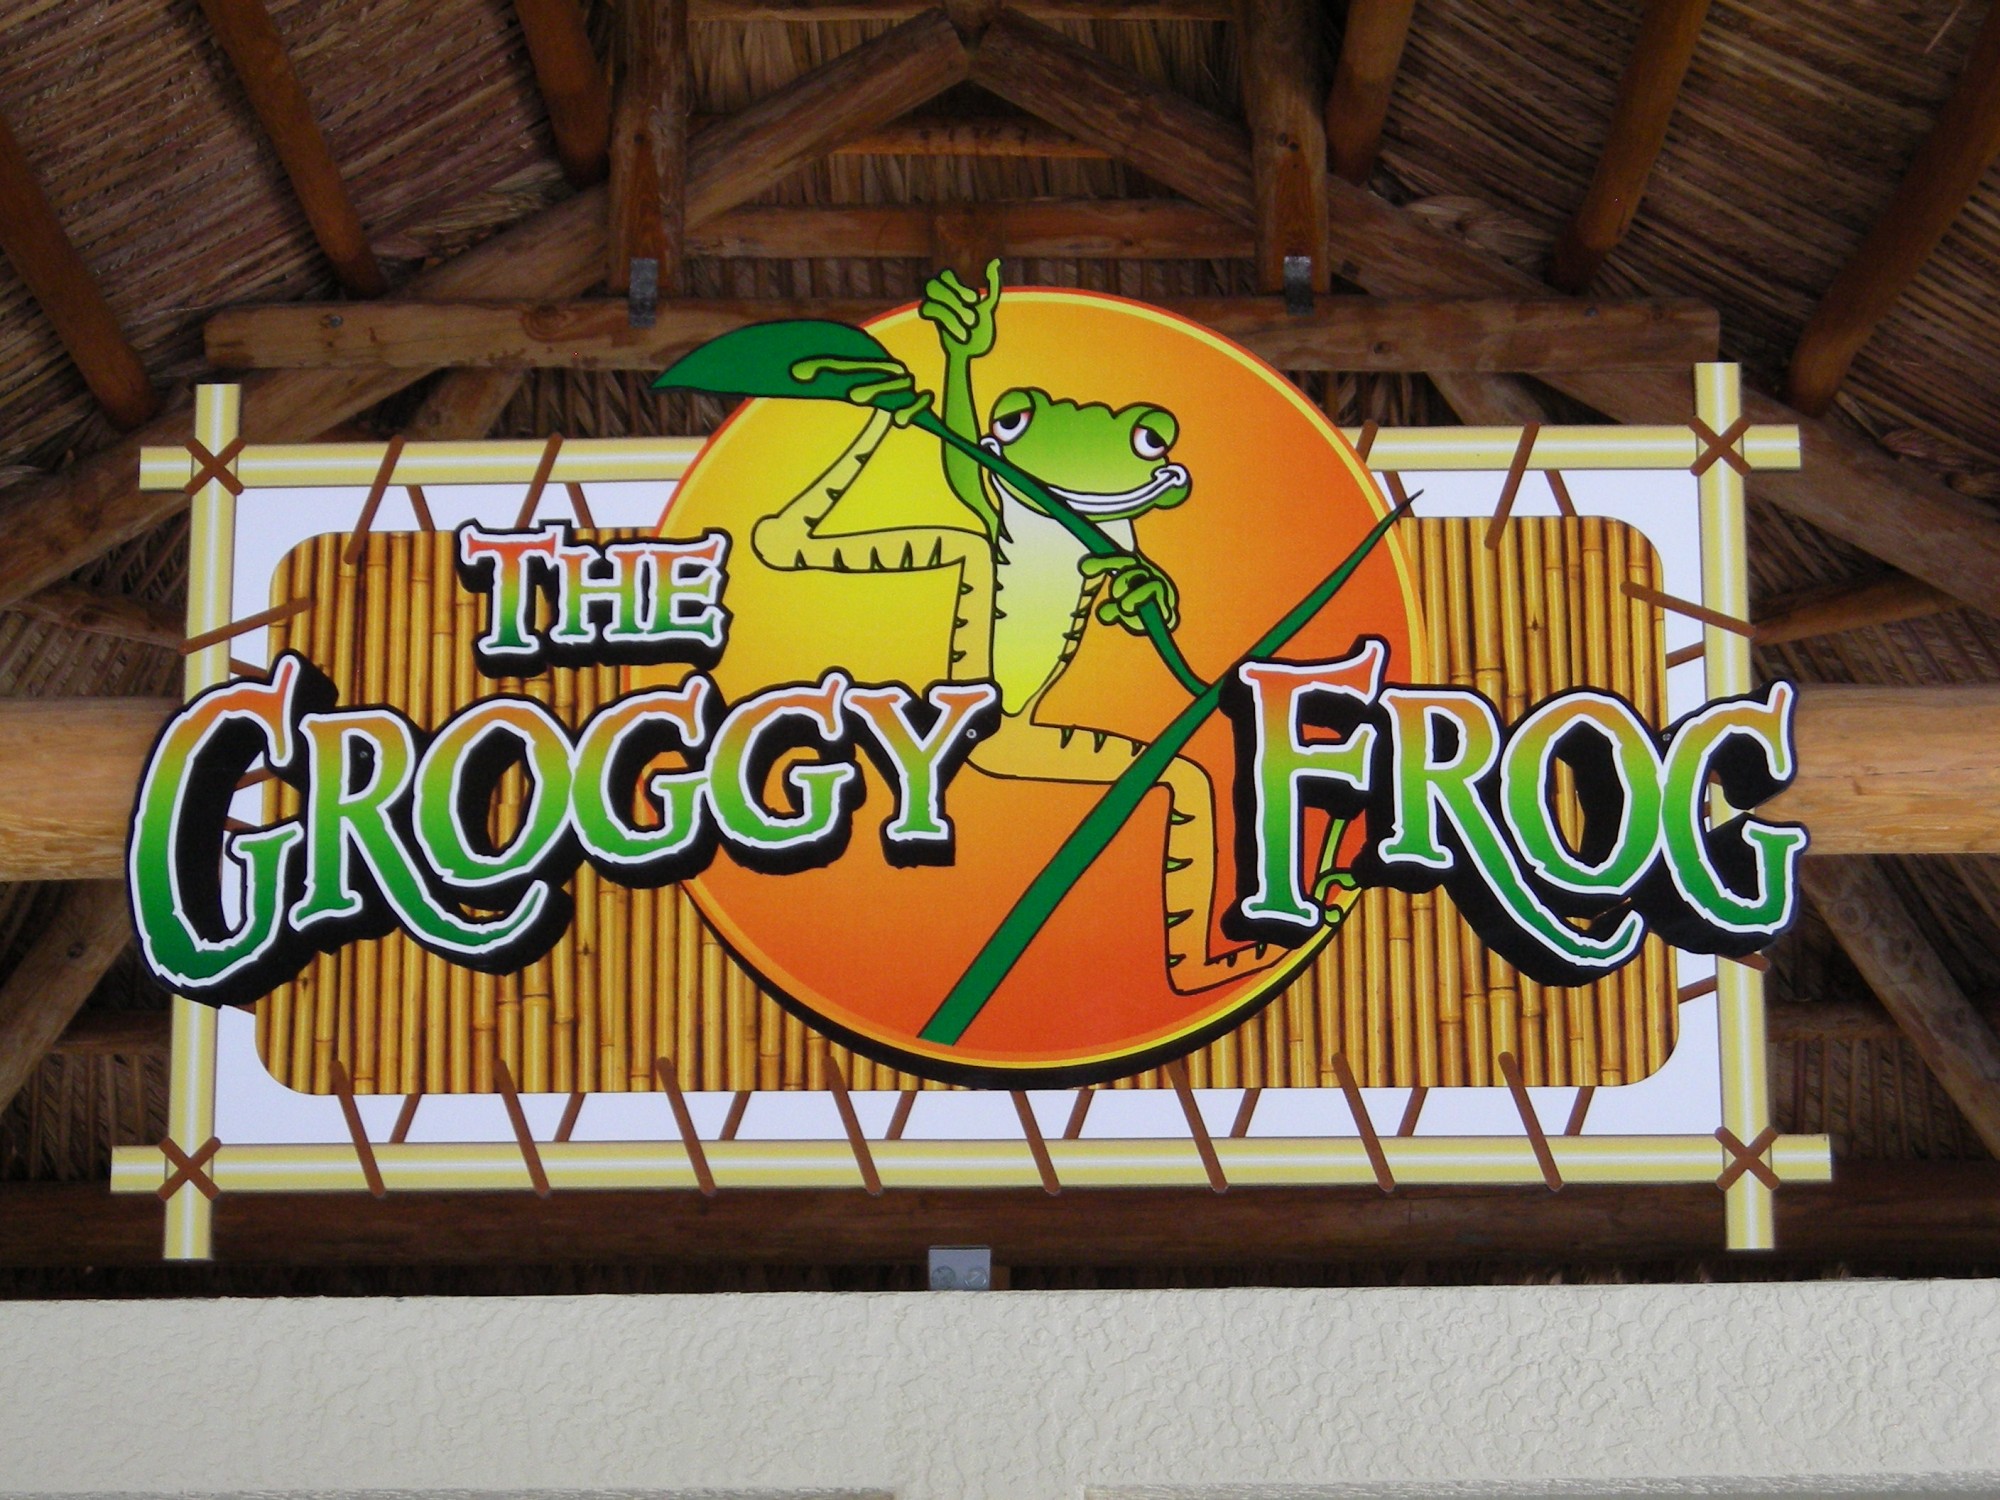 Friends meet at The Groggy Frog by the Resort Pool!